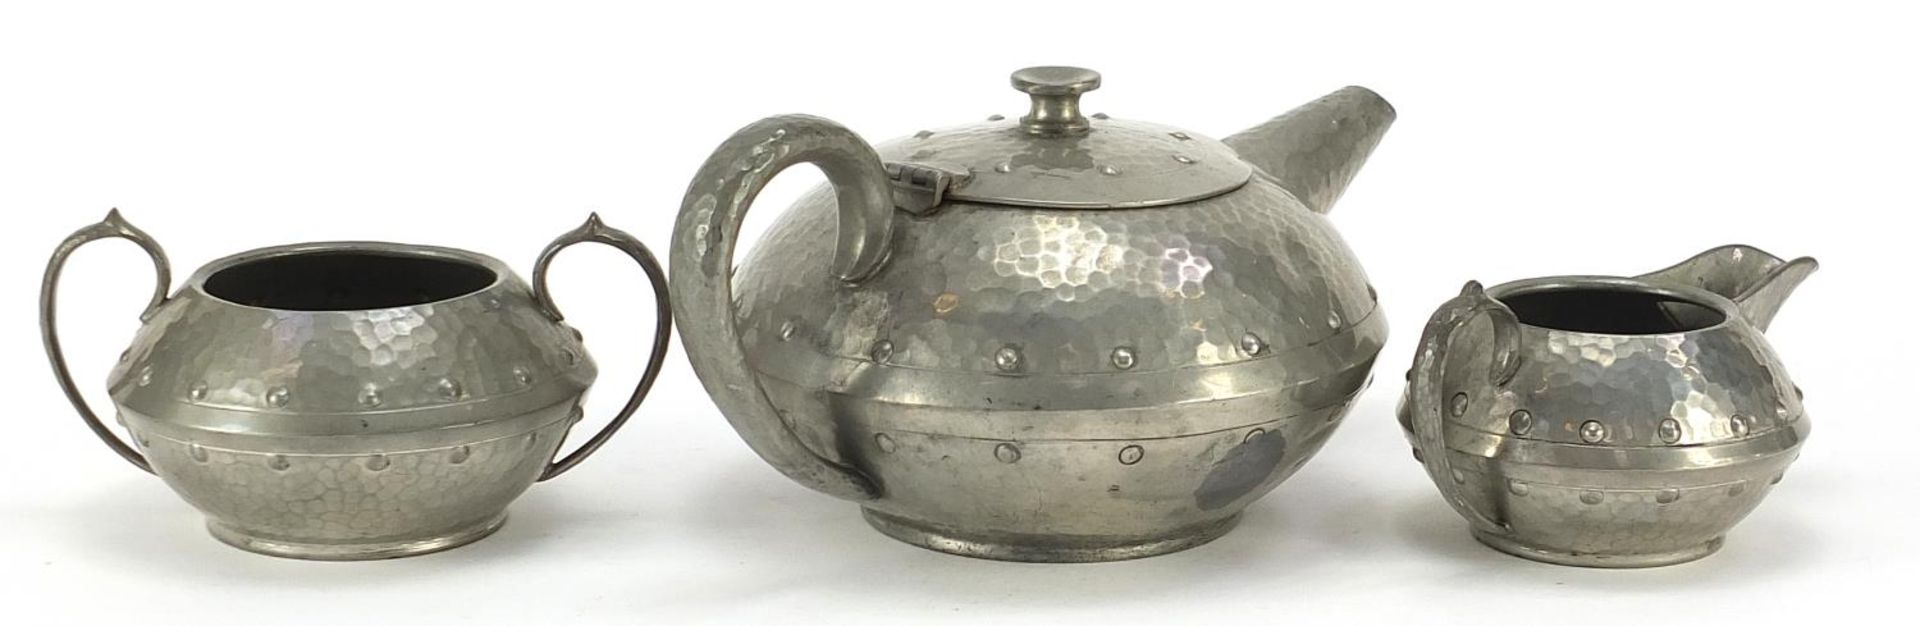 Arts & Crafts baronial pewter tea set, the largest 23.5cm in length - Image 2 of 4